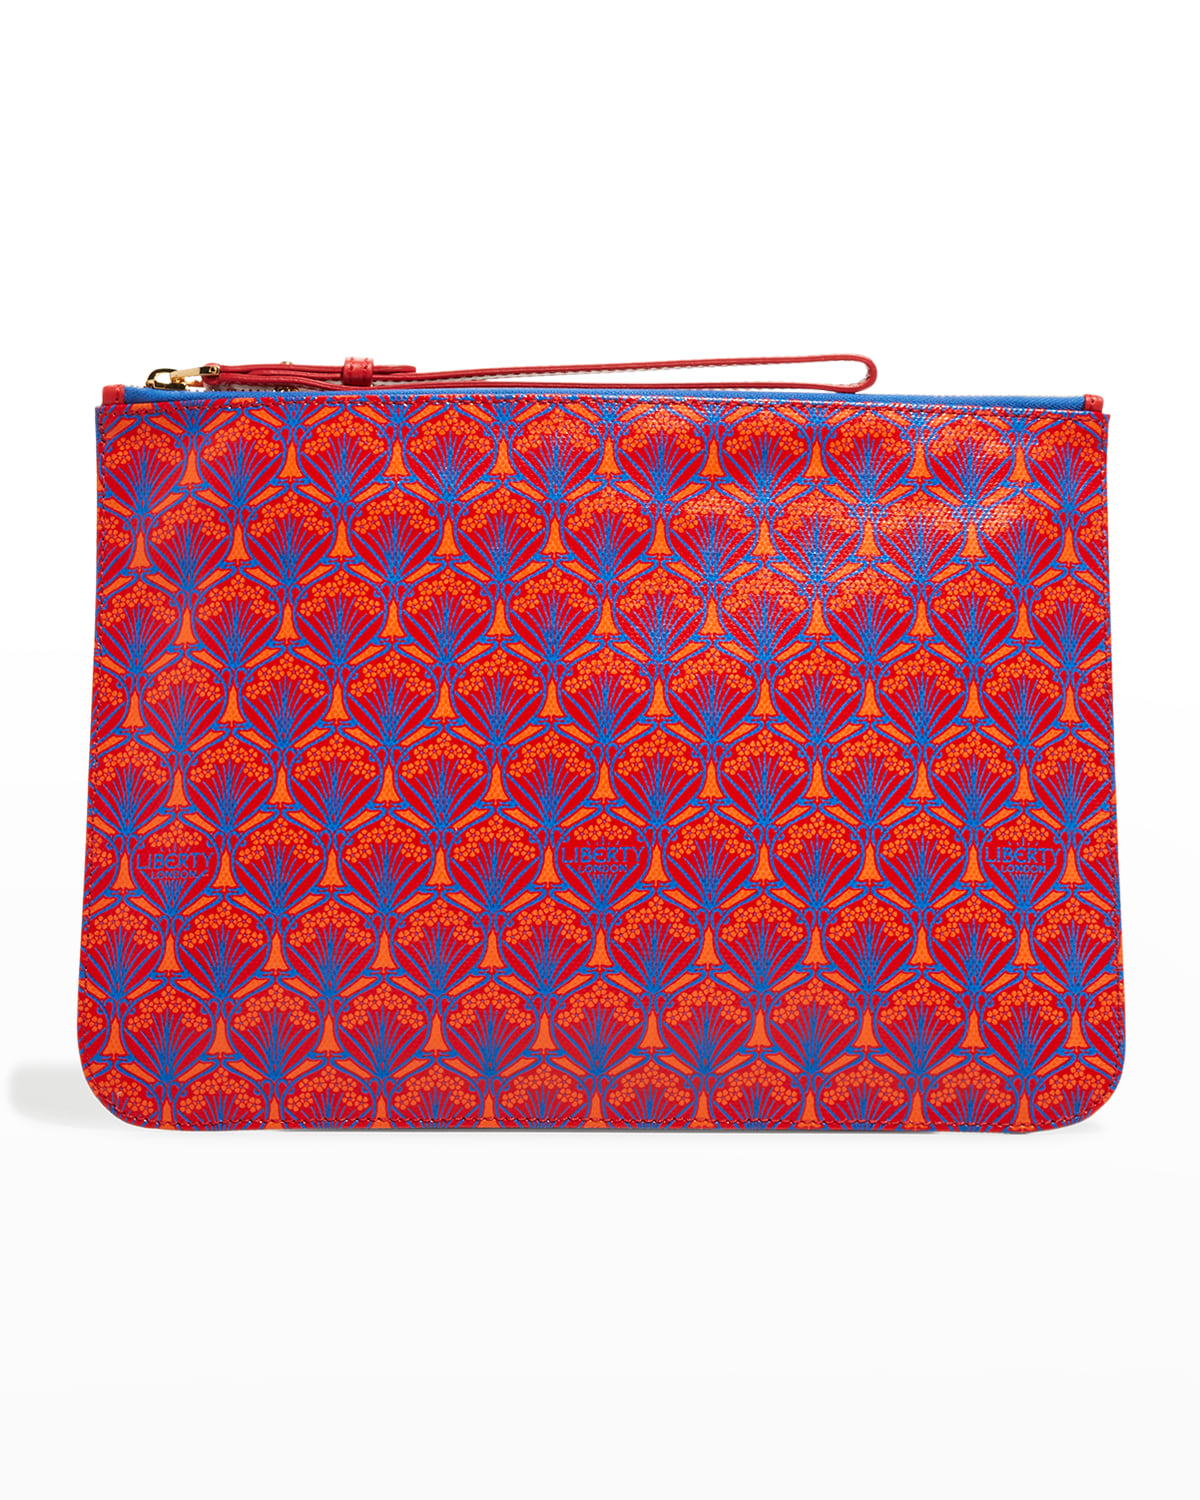 Liberty London Iphis 30 Zip Pouch Printed Clutch Bag  In 80 Red